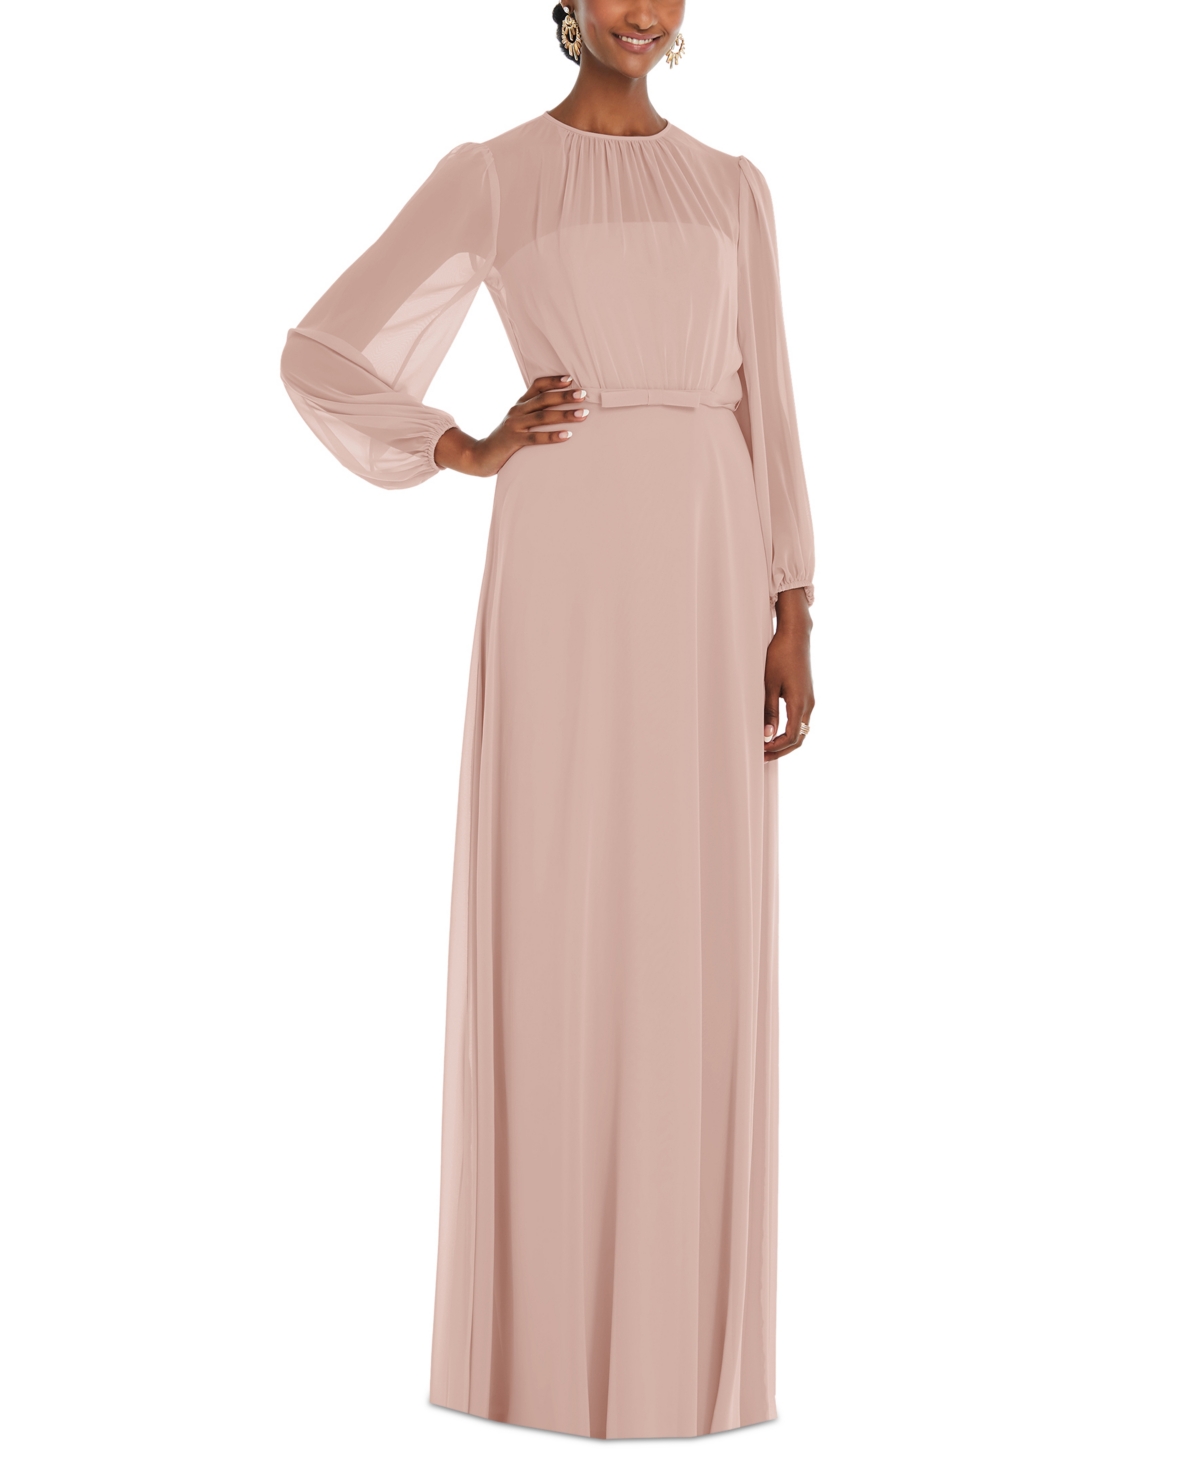 Dessy Collection Women's Long-Sleeve Chiffon Gown